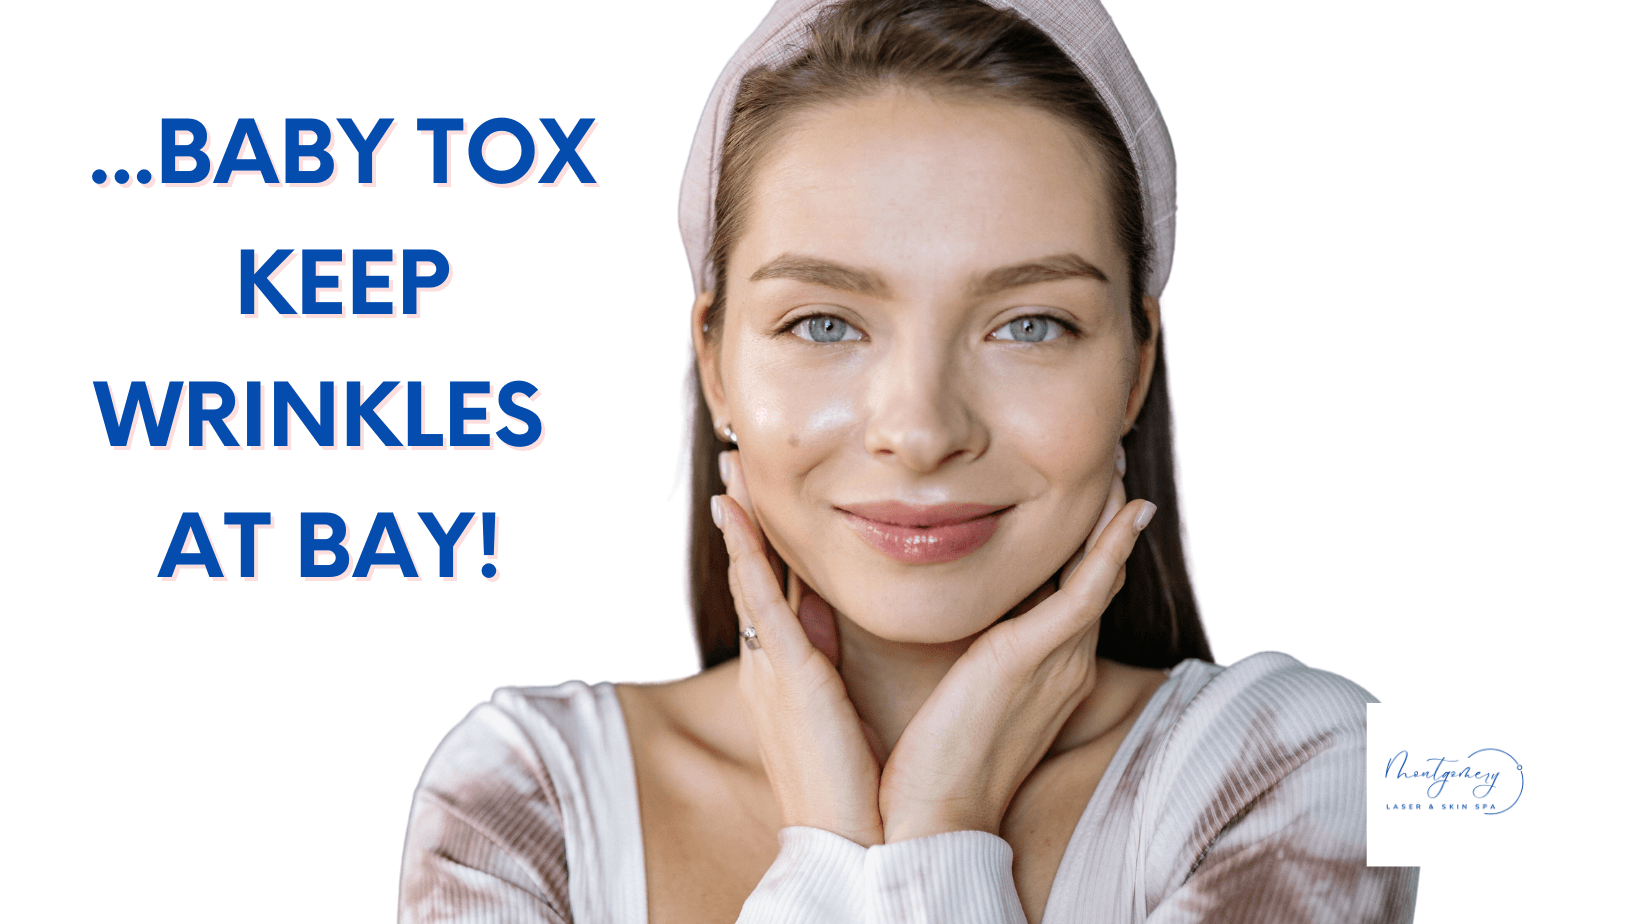 Baby Tox to prevent wrinkles and fine lines